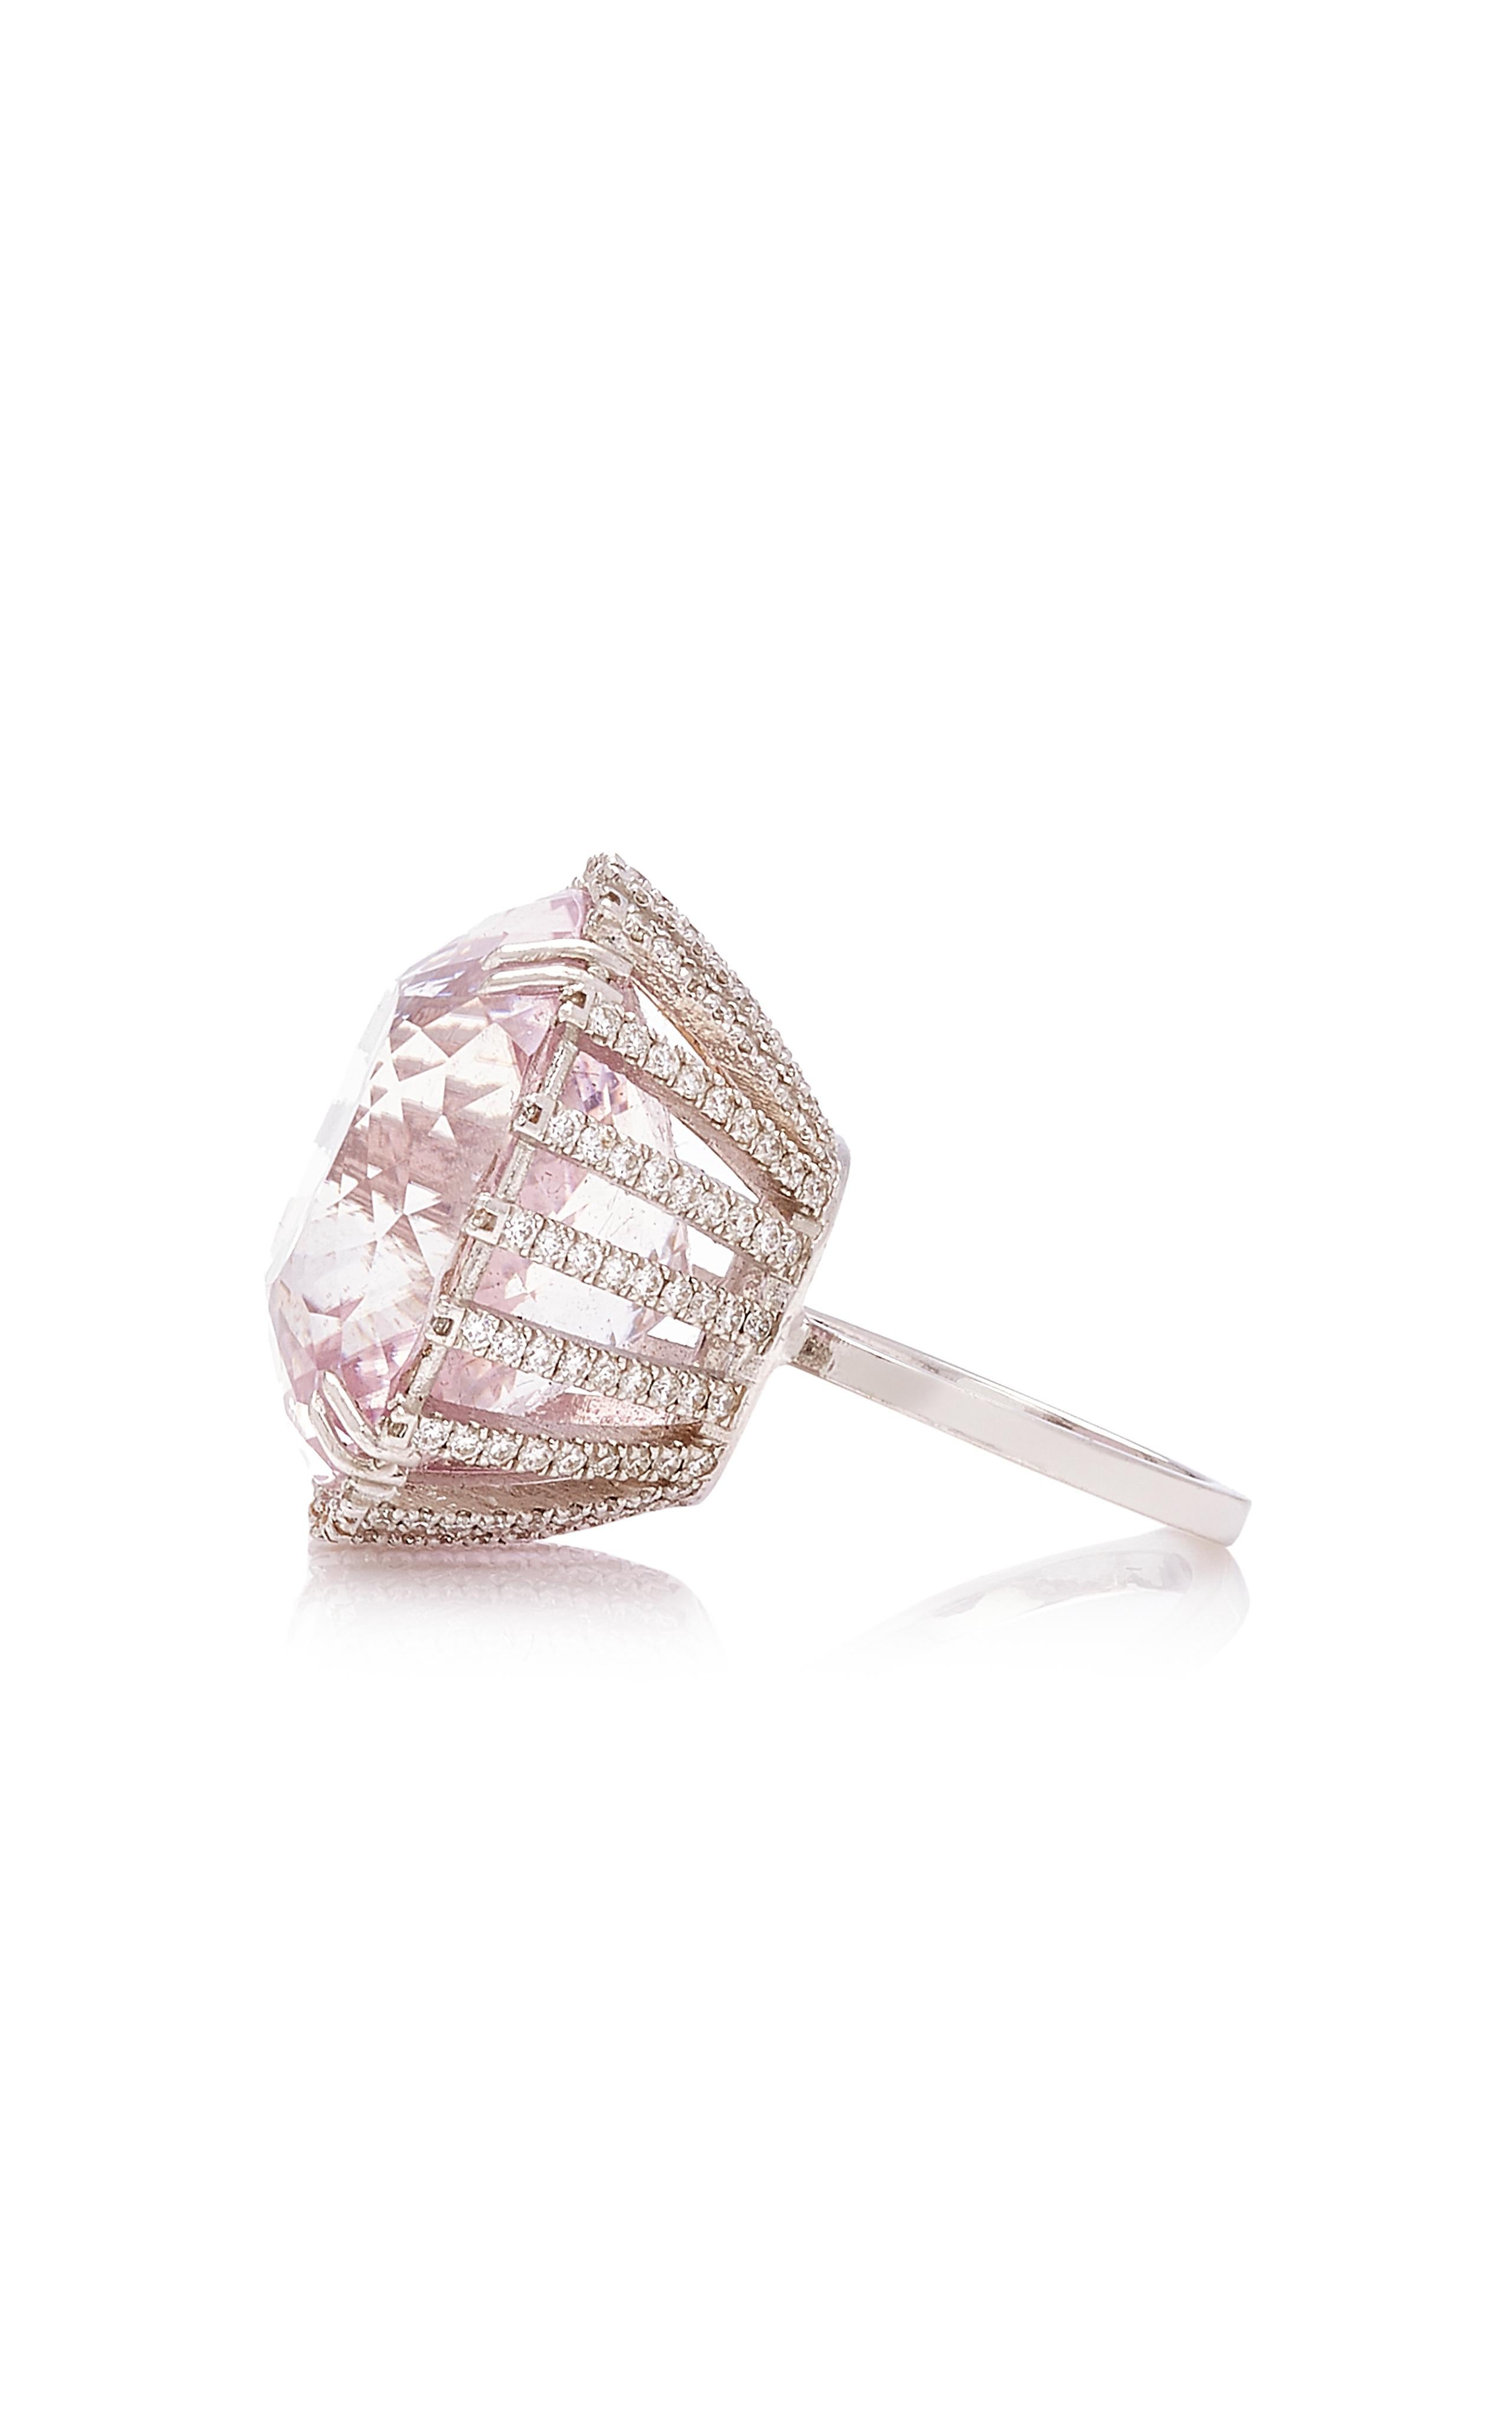 Sparkling Pink Kunzite & White Diamonds Ring
features Custom Cushion Cut Faceted Kunzite that radiates prismatic hues of lavender and pink, 
presented on stunning diamond encrusted prongs with a supporting frame of full white diamond pave lines and